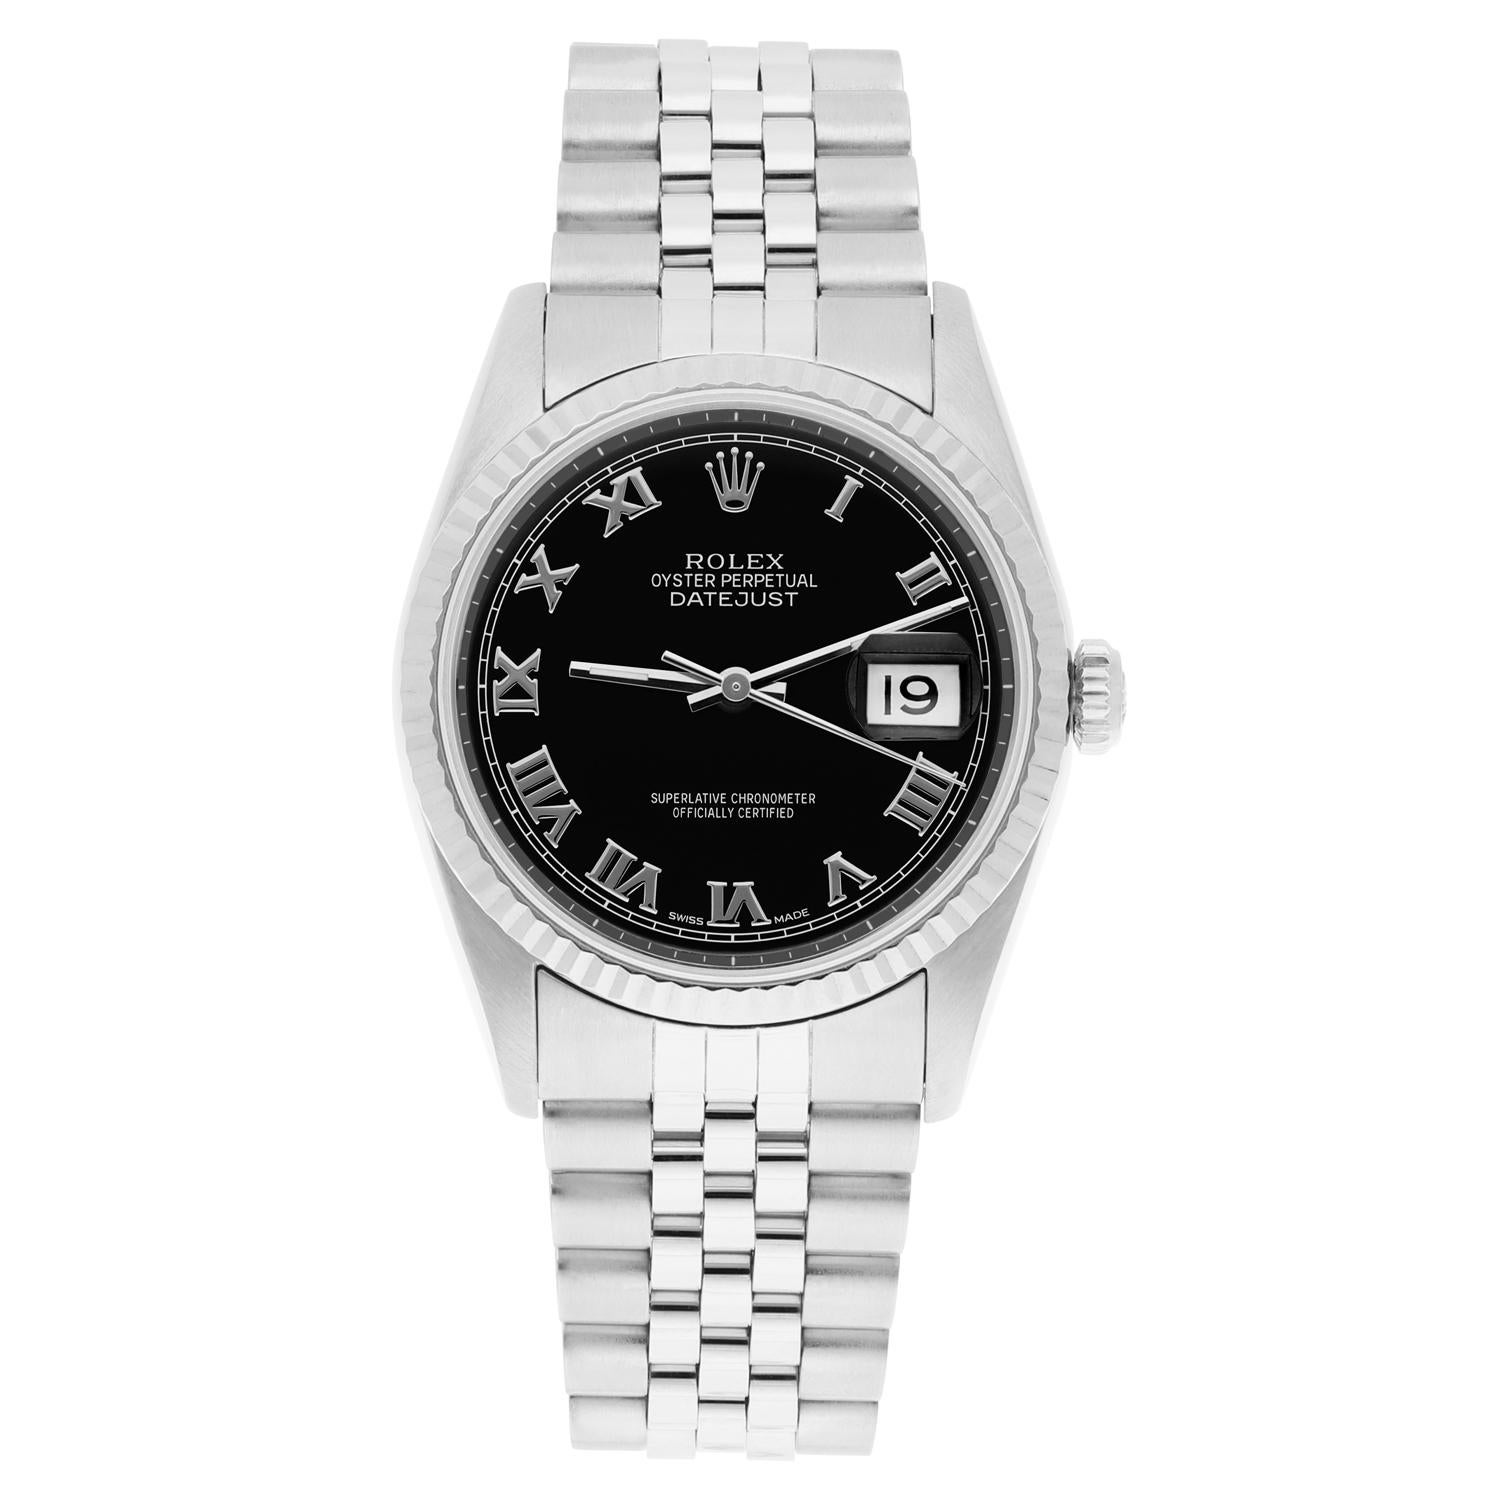 This watch has been professionally polished, serviced and is in excellent overall condition. There are absolutely no visible scratches or blemishes. Model features quick-set movement. Authenticity guaranteed! The sale comes with a jewelry box,